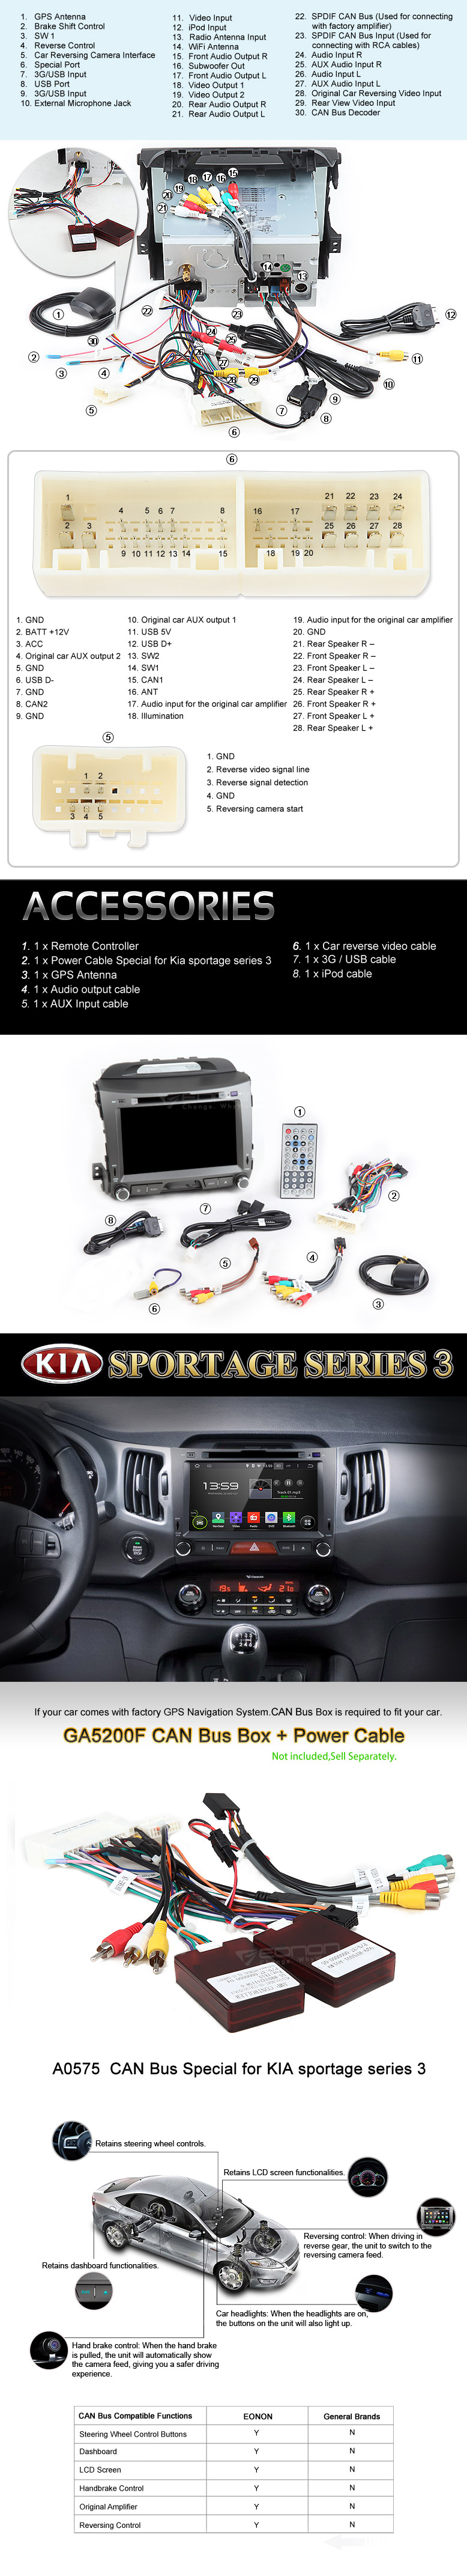 Kia android car dvd gps,android car stereo,car dvd player